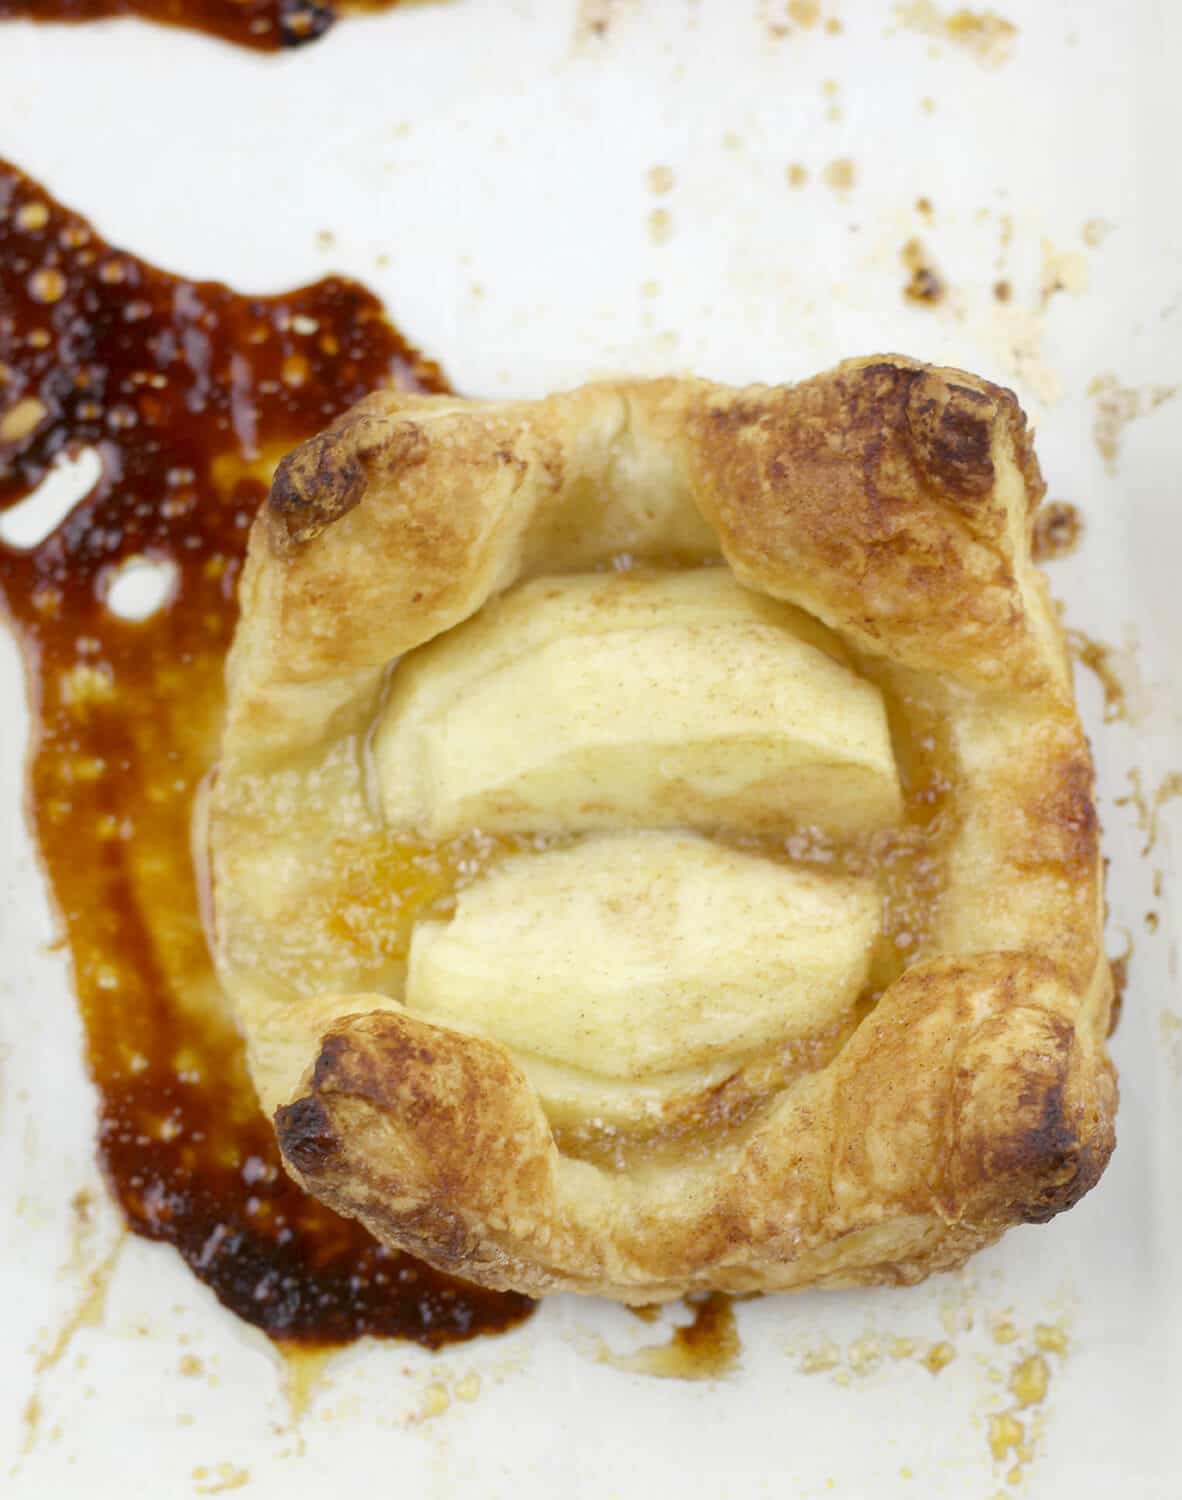 Apple tarts with orange-almond marmalade using puff pastry--quick and easy! Perfect for a weeknight dessert or even for company.